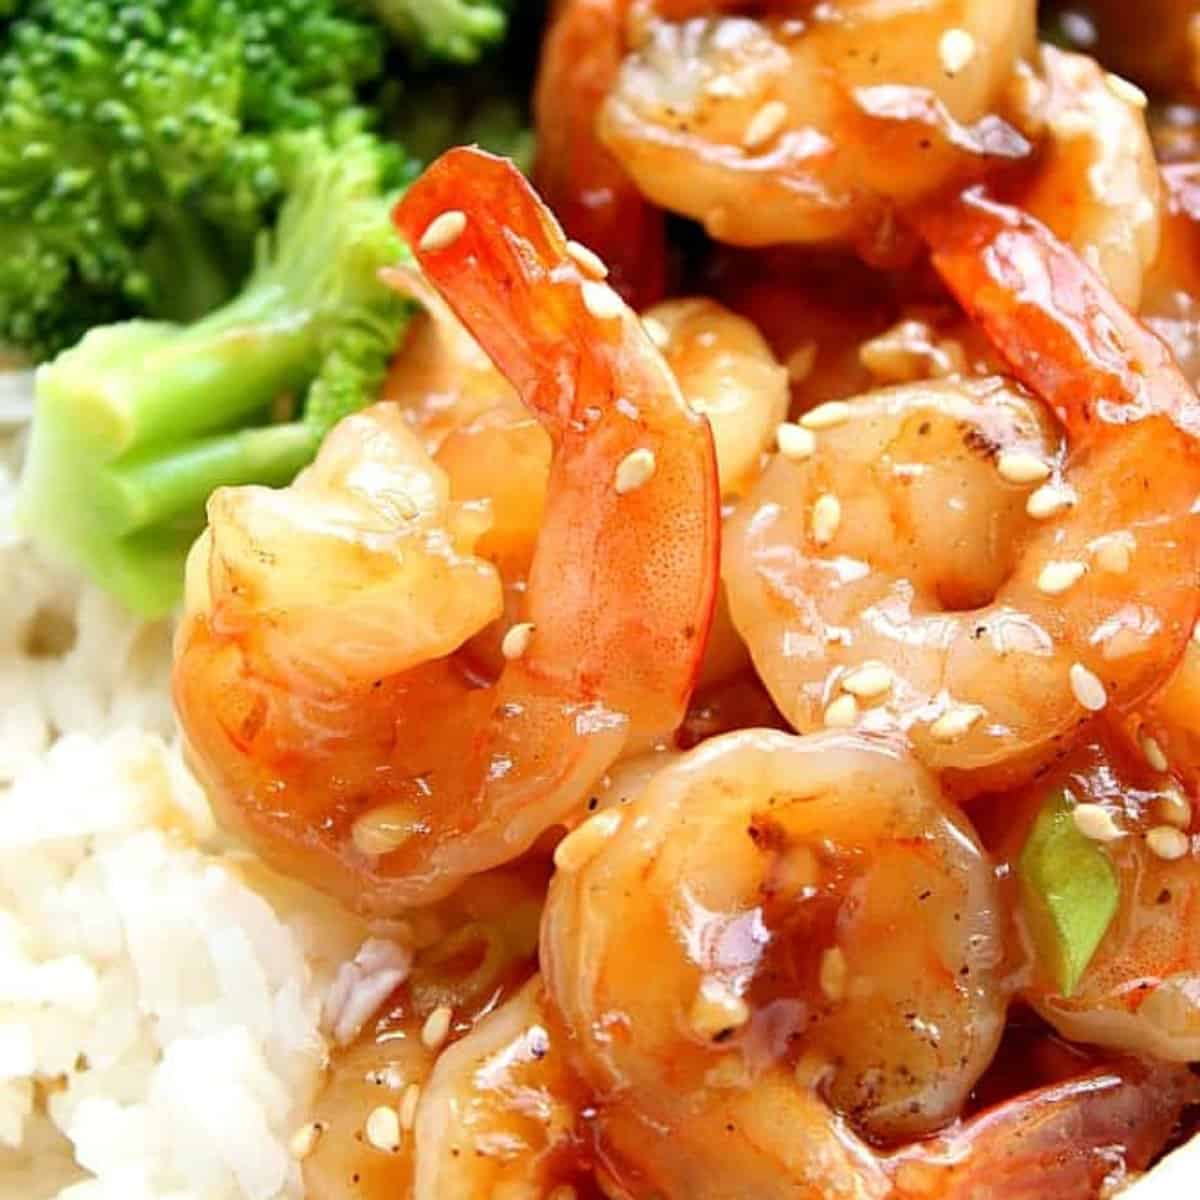 Square image of shrimp with teriyaki sauce on rice, with steamed broccoli next to it, all set in a bowl.